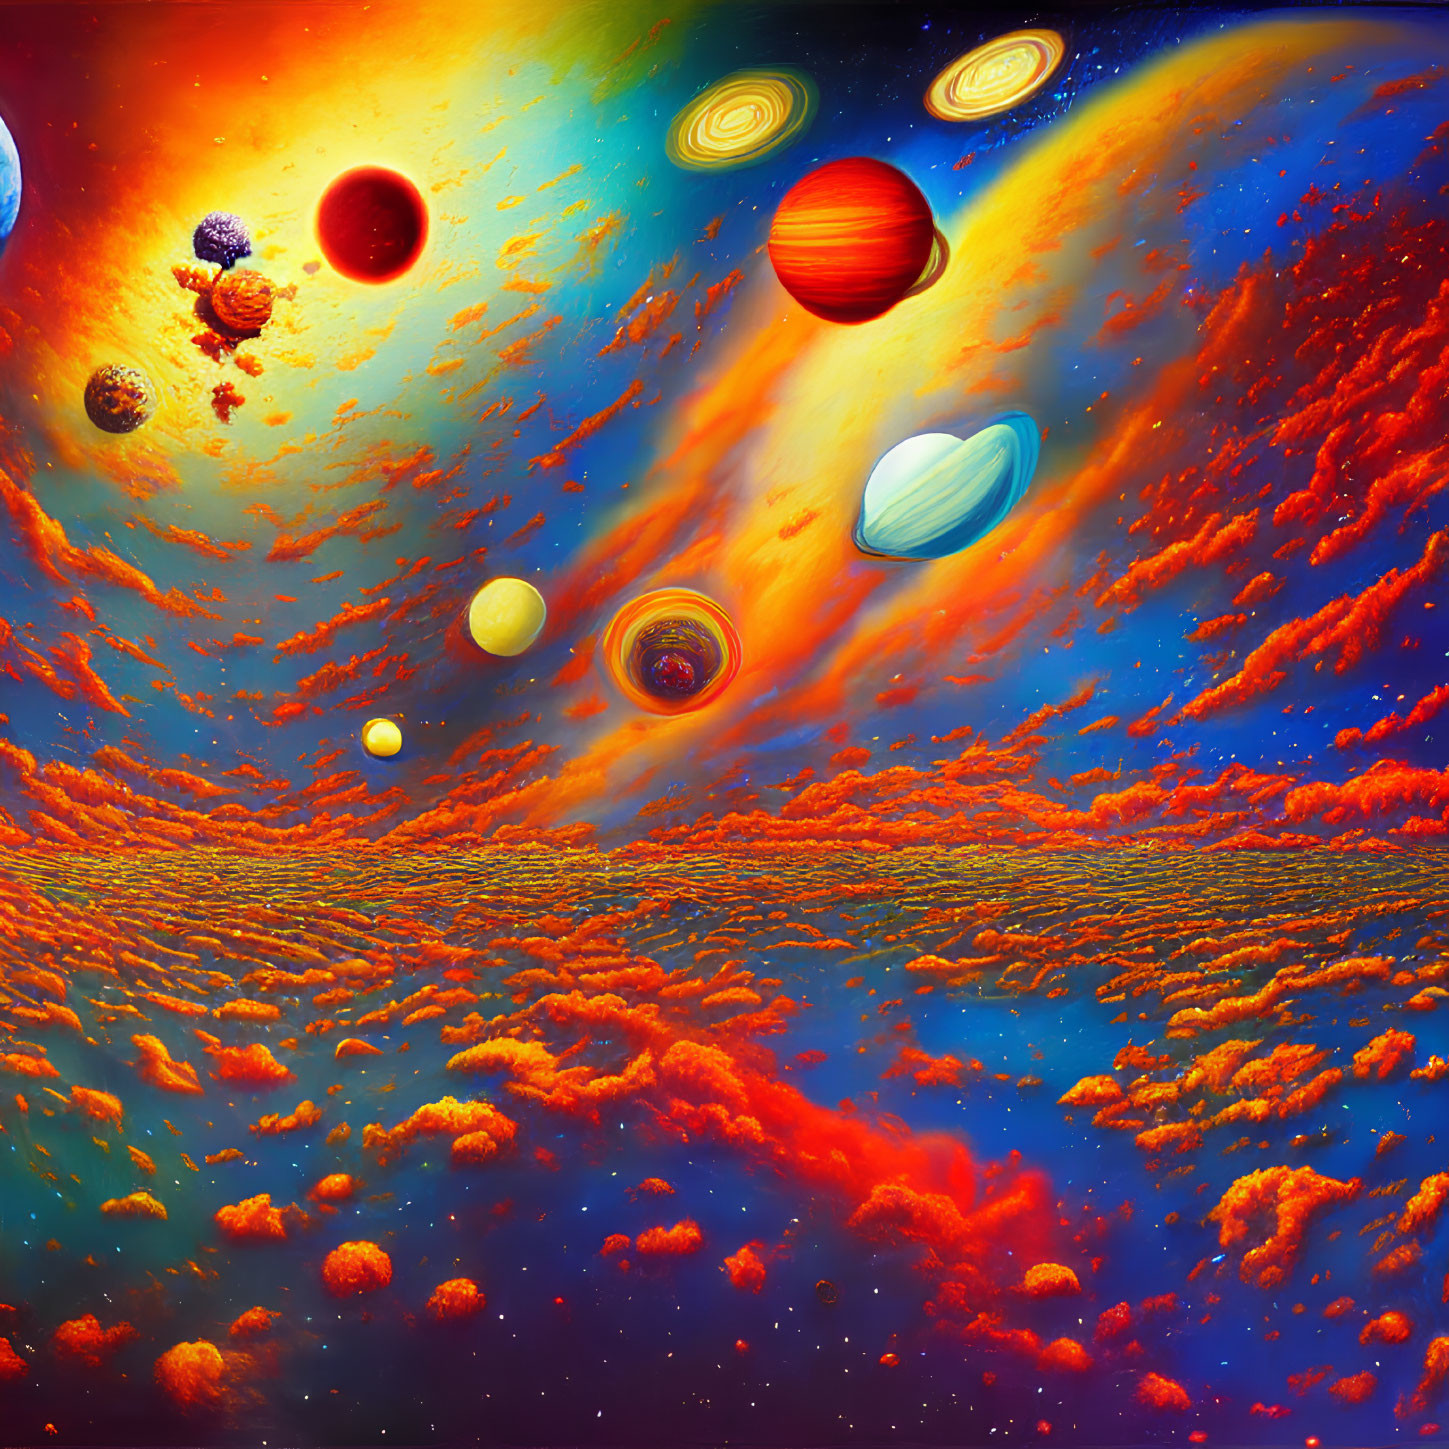 Colorful Nebulae and Planets in Space Scene